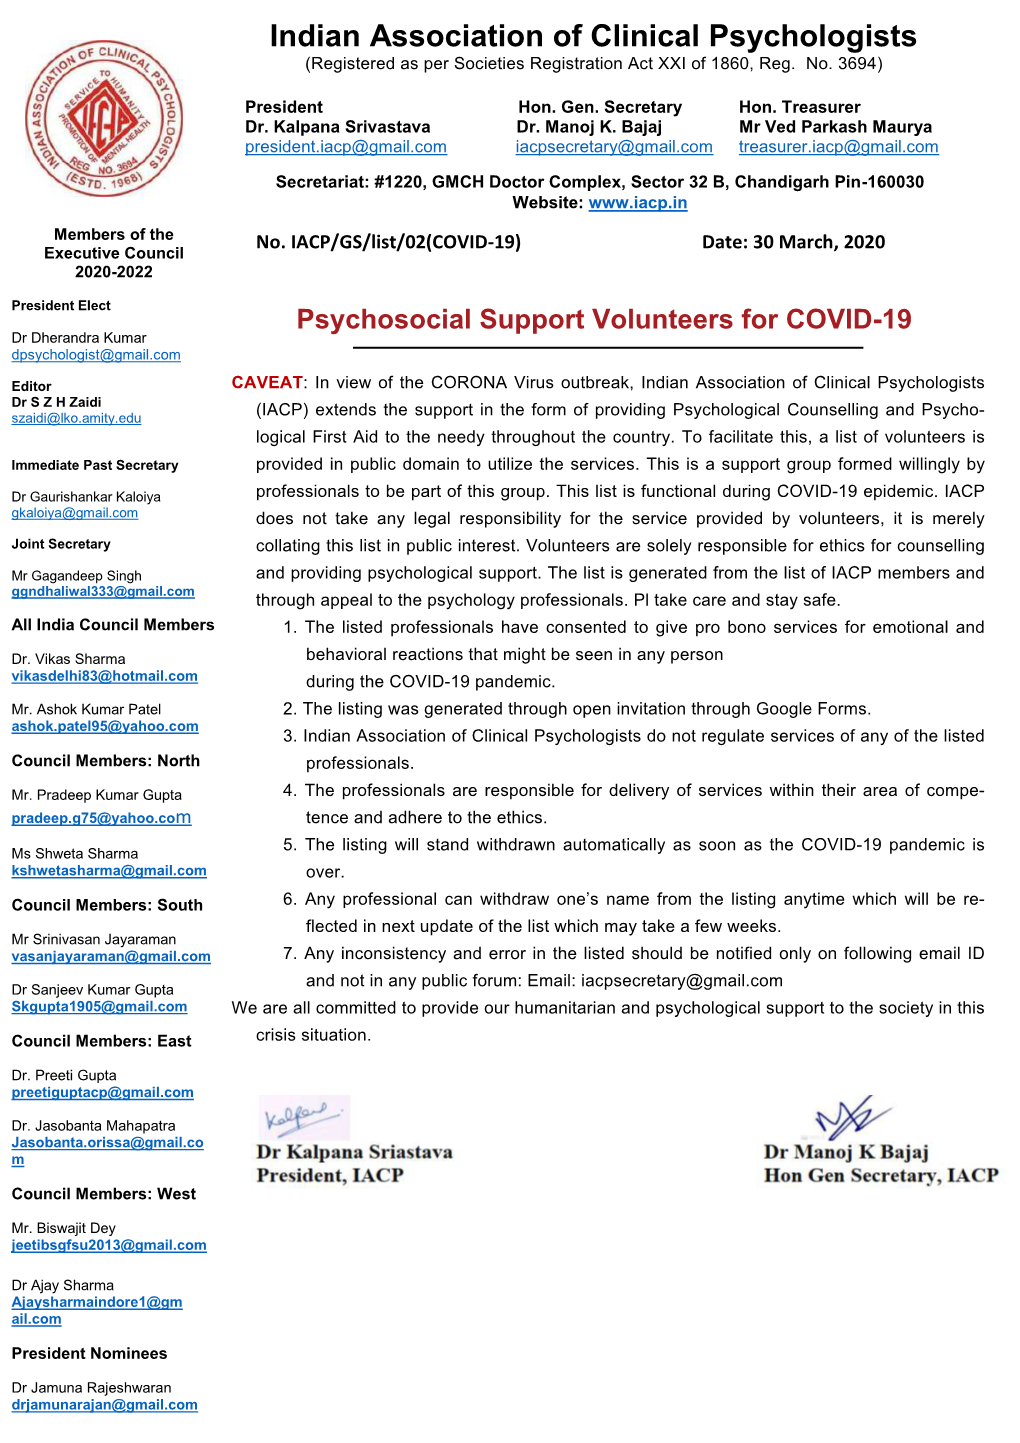 Indian Association of Clinical Psychologists (Registered As Per Societies Registration Act XXI of 1860, Reg